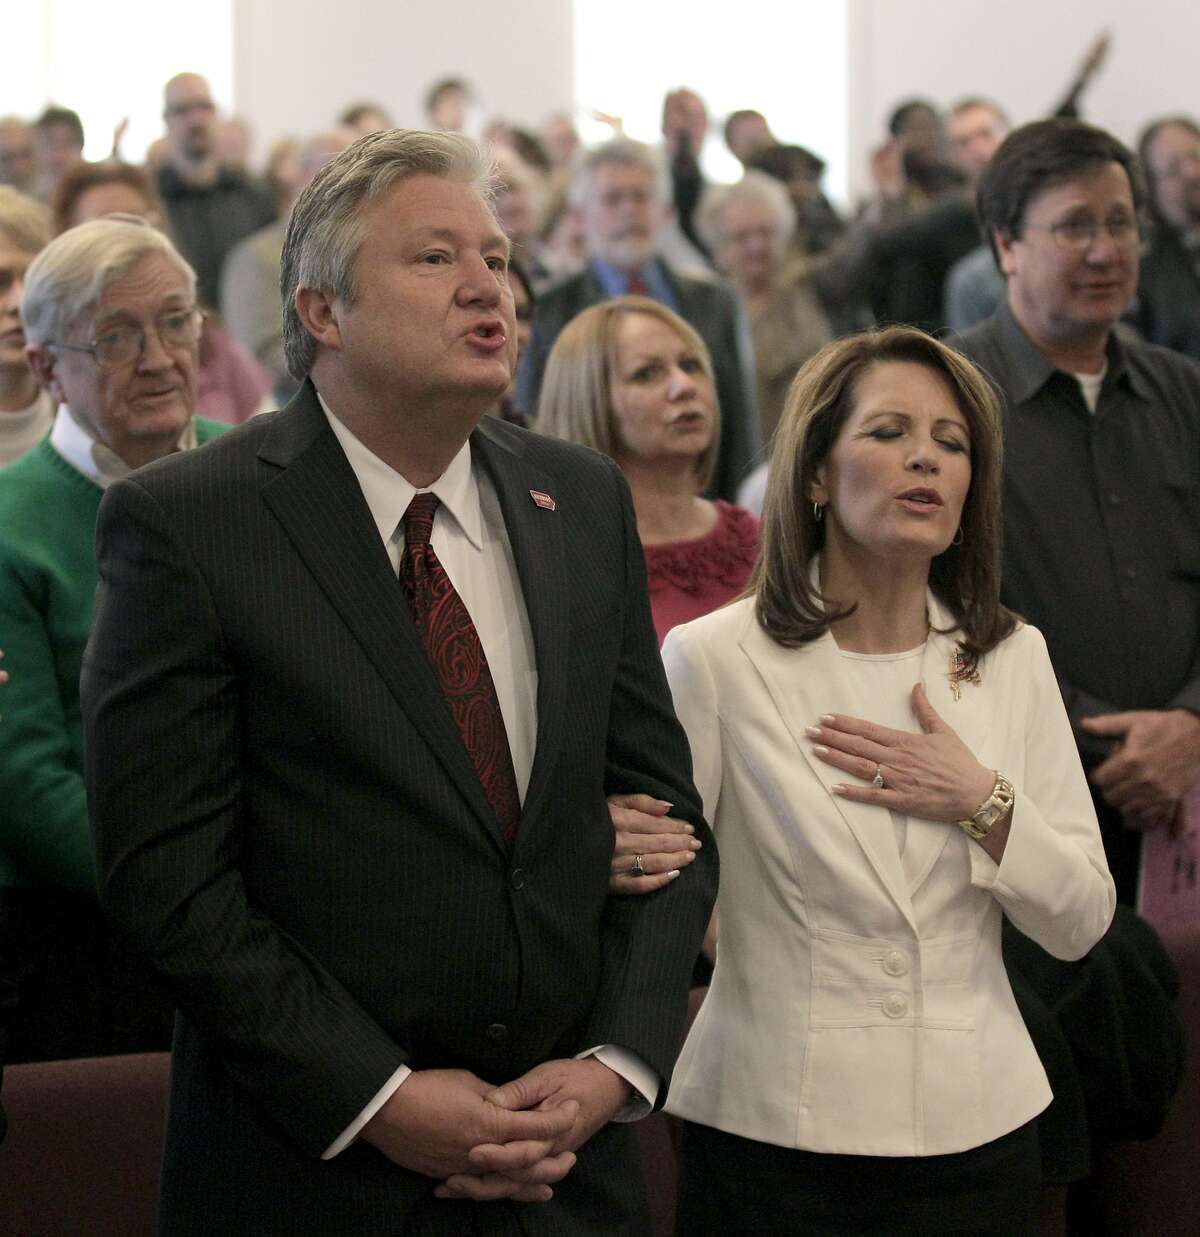 Then-Republican presidential candidate, Rep. Michele Bachmann, R-Minn., and her husband Marcus attend services at Jubilee Family Church in Oskaloosa, Iowa, Sunday, Jan, 1, 2012. (AP Photo/Charlie Riedel)